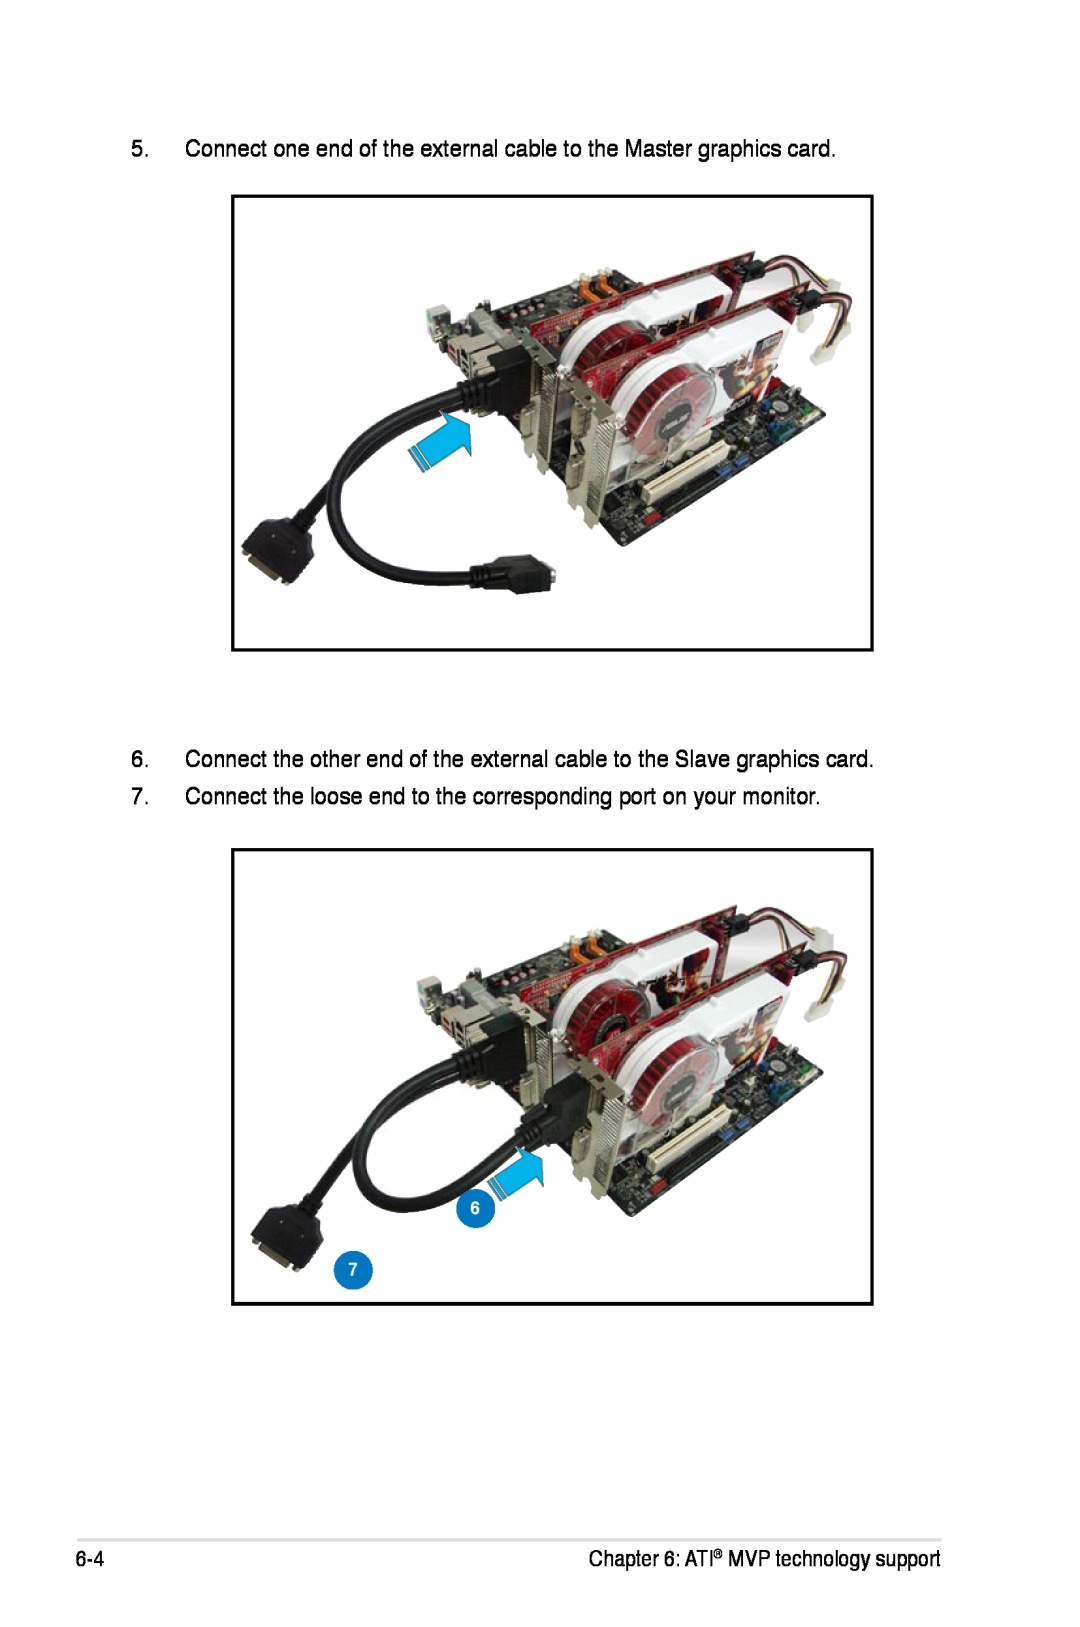 Asus P5K/EPU manual Connect one end of the external cable to the Master graphics card, ATI MVP technology support 